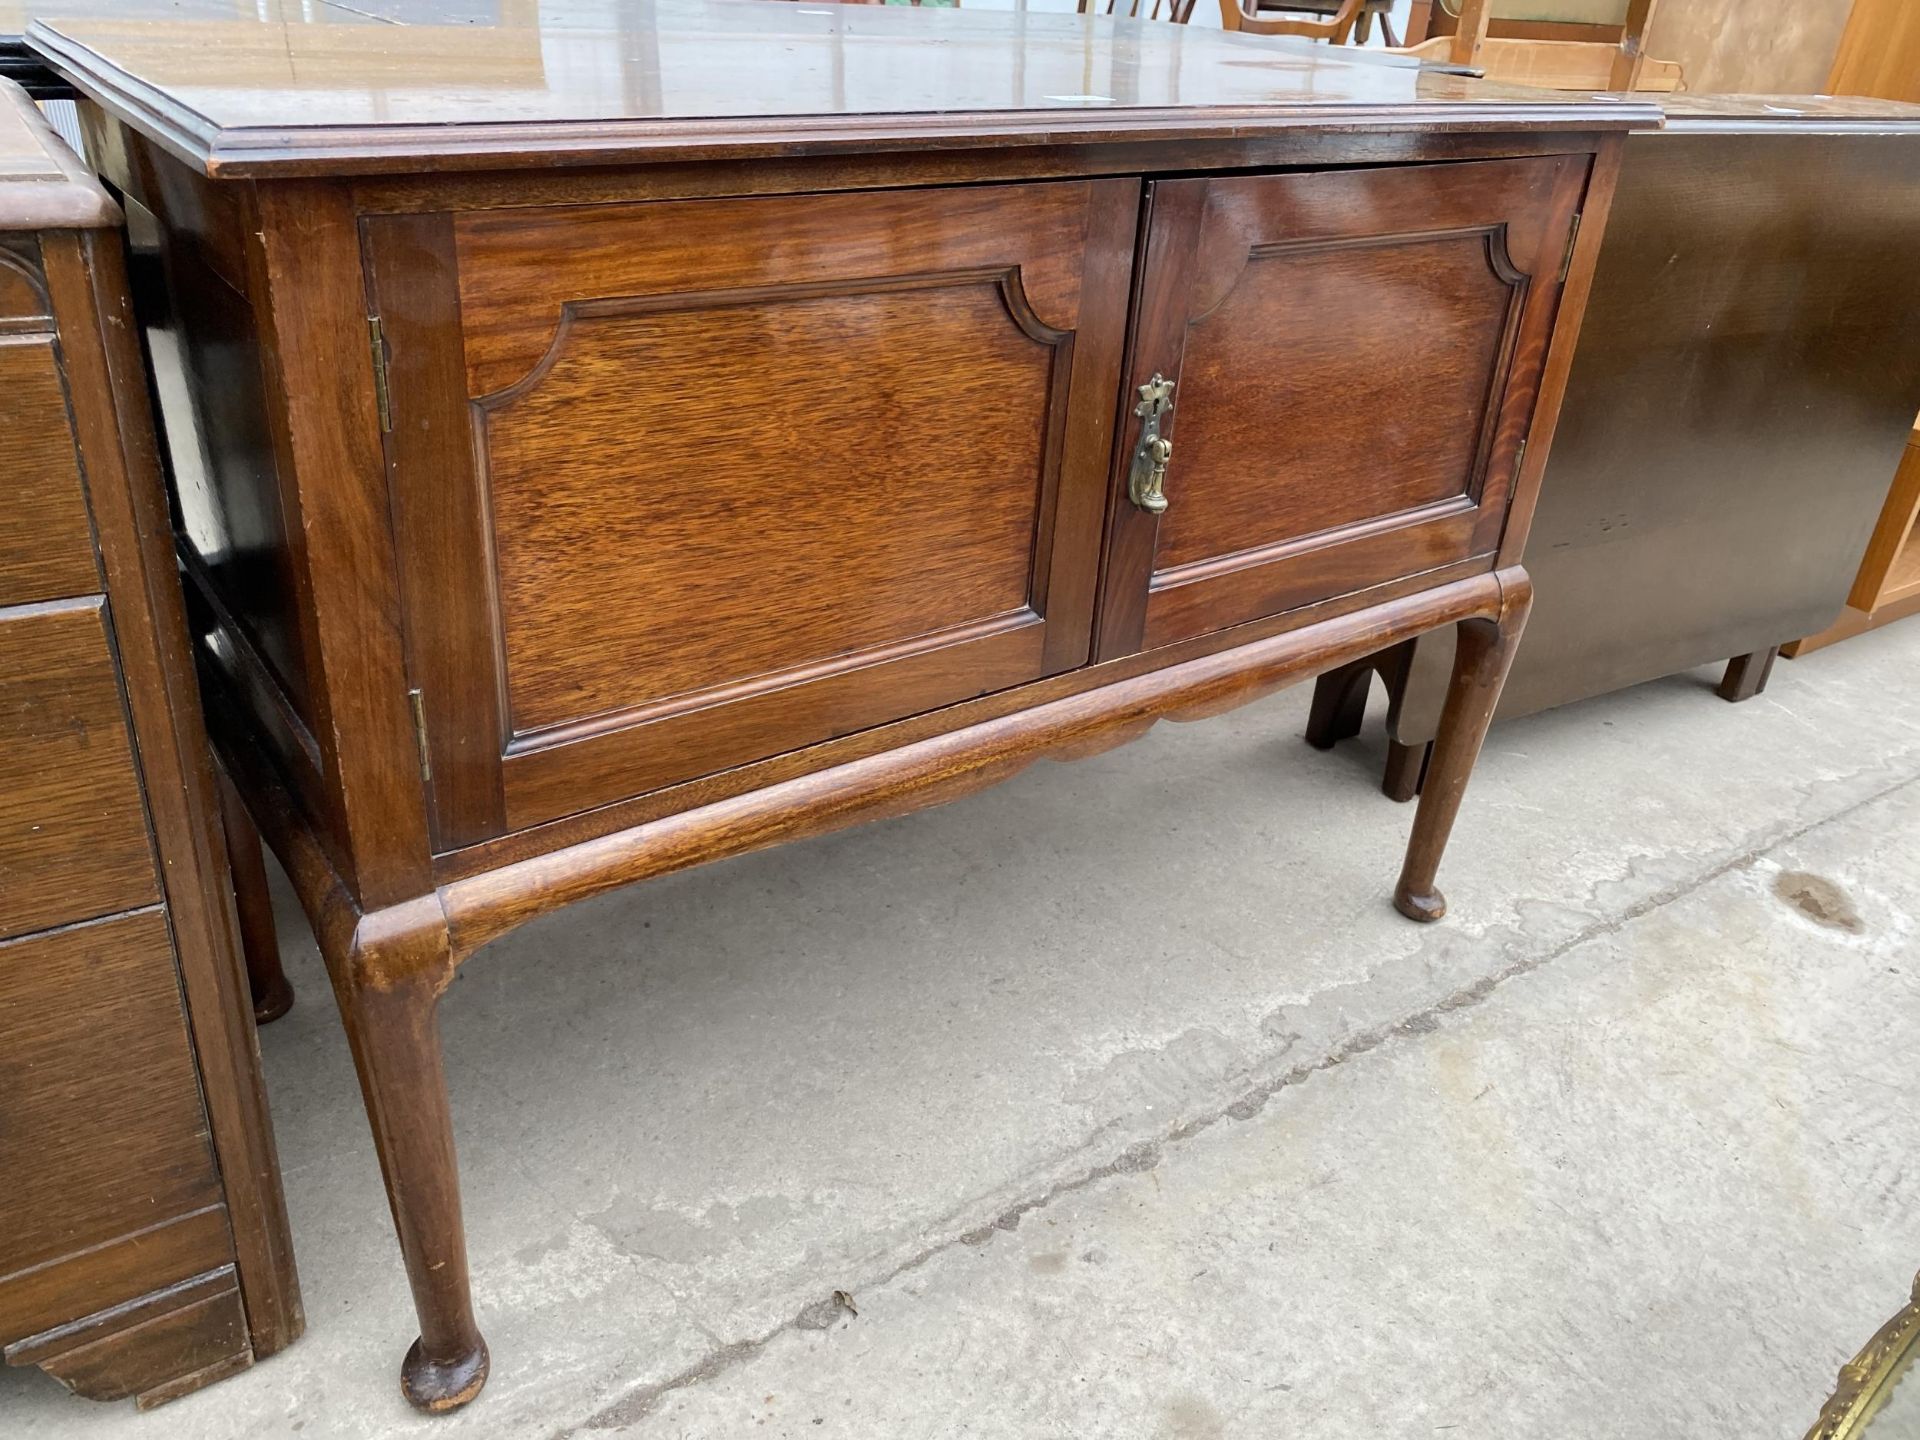 AN EDWARDIAN MAHOGANY TWO DOOR WASHSTAND, 41" WIDE - Image 2 of 5